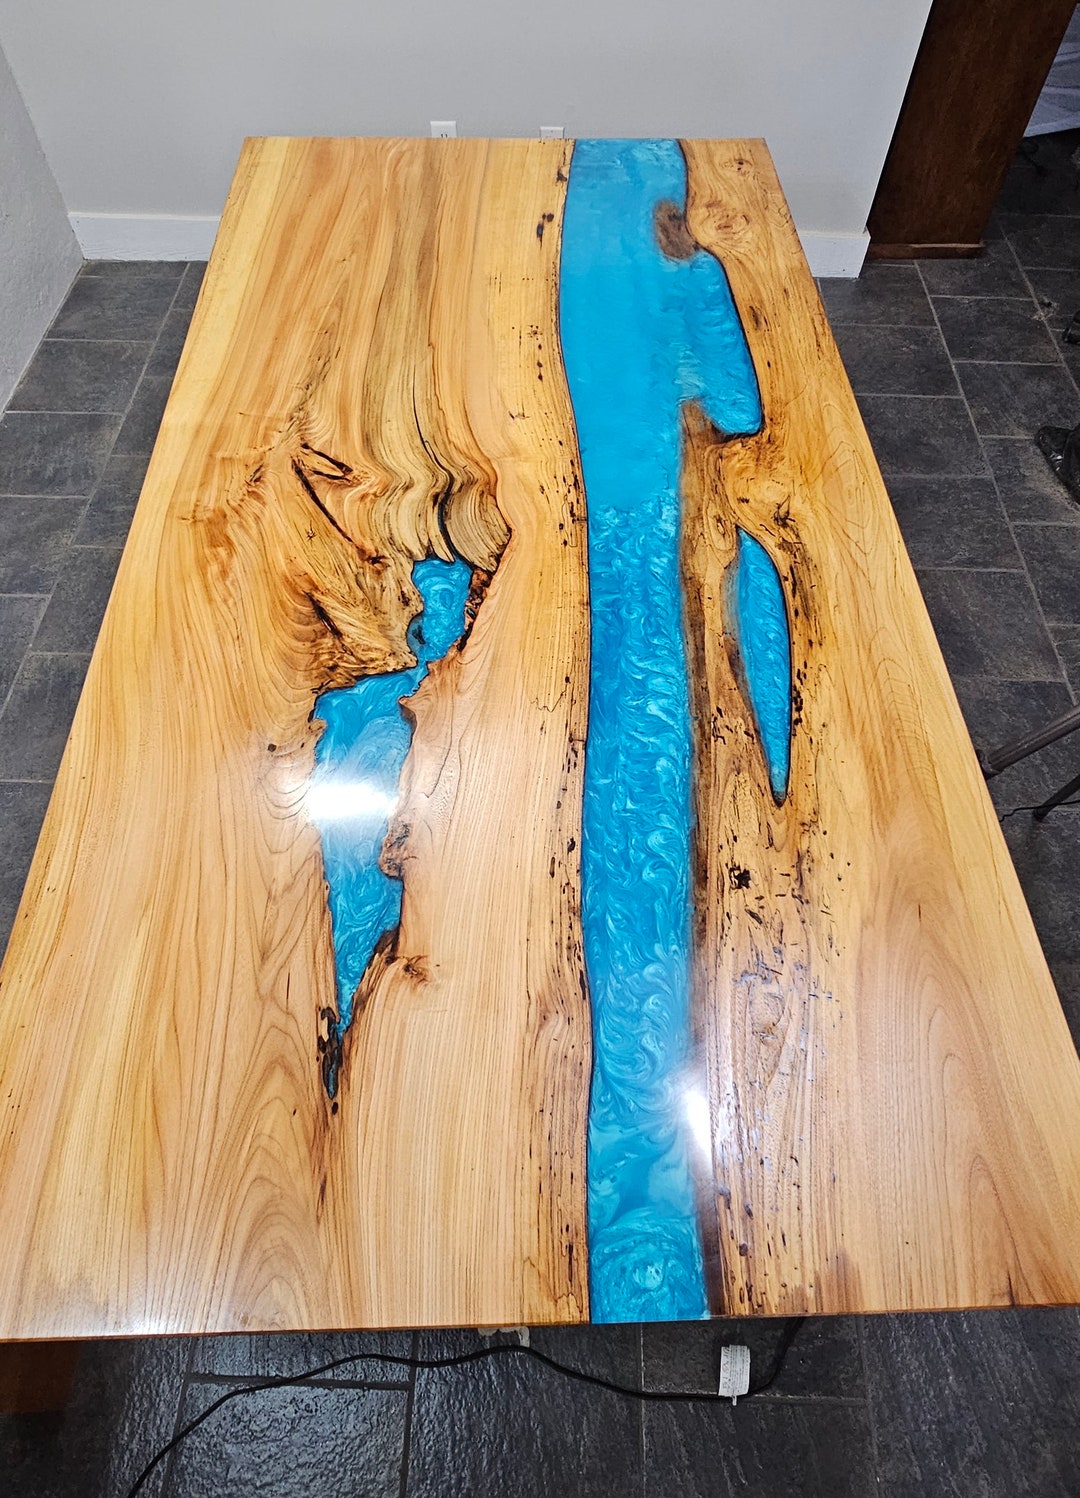 Customizable American Elm (or similar) and Epoxy River Dining Table